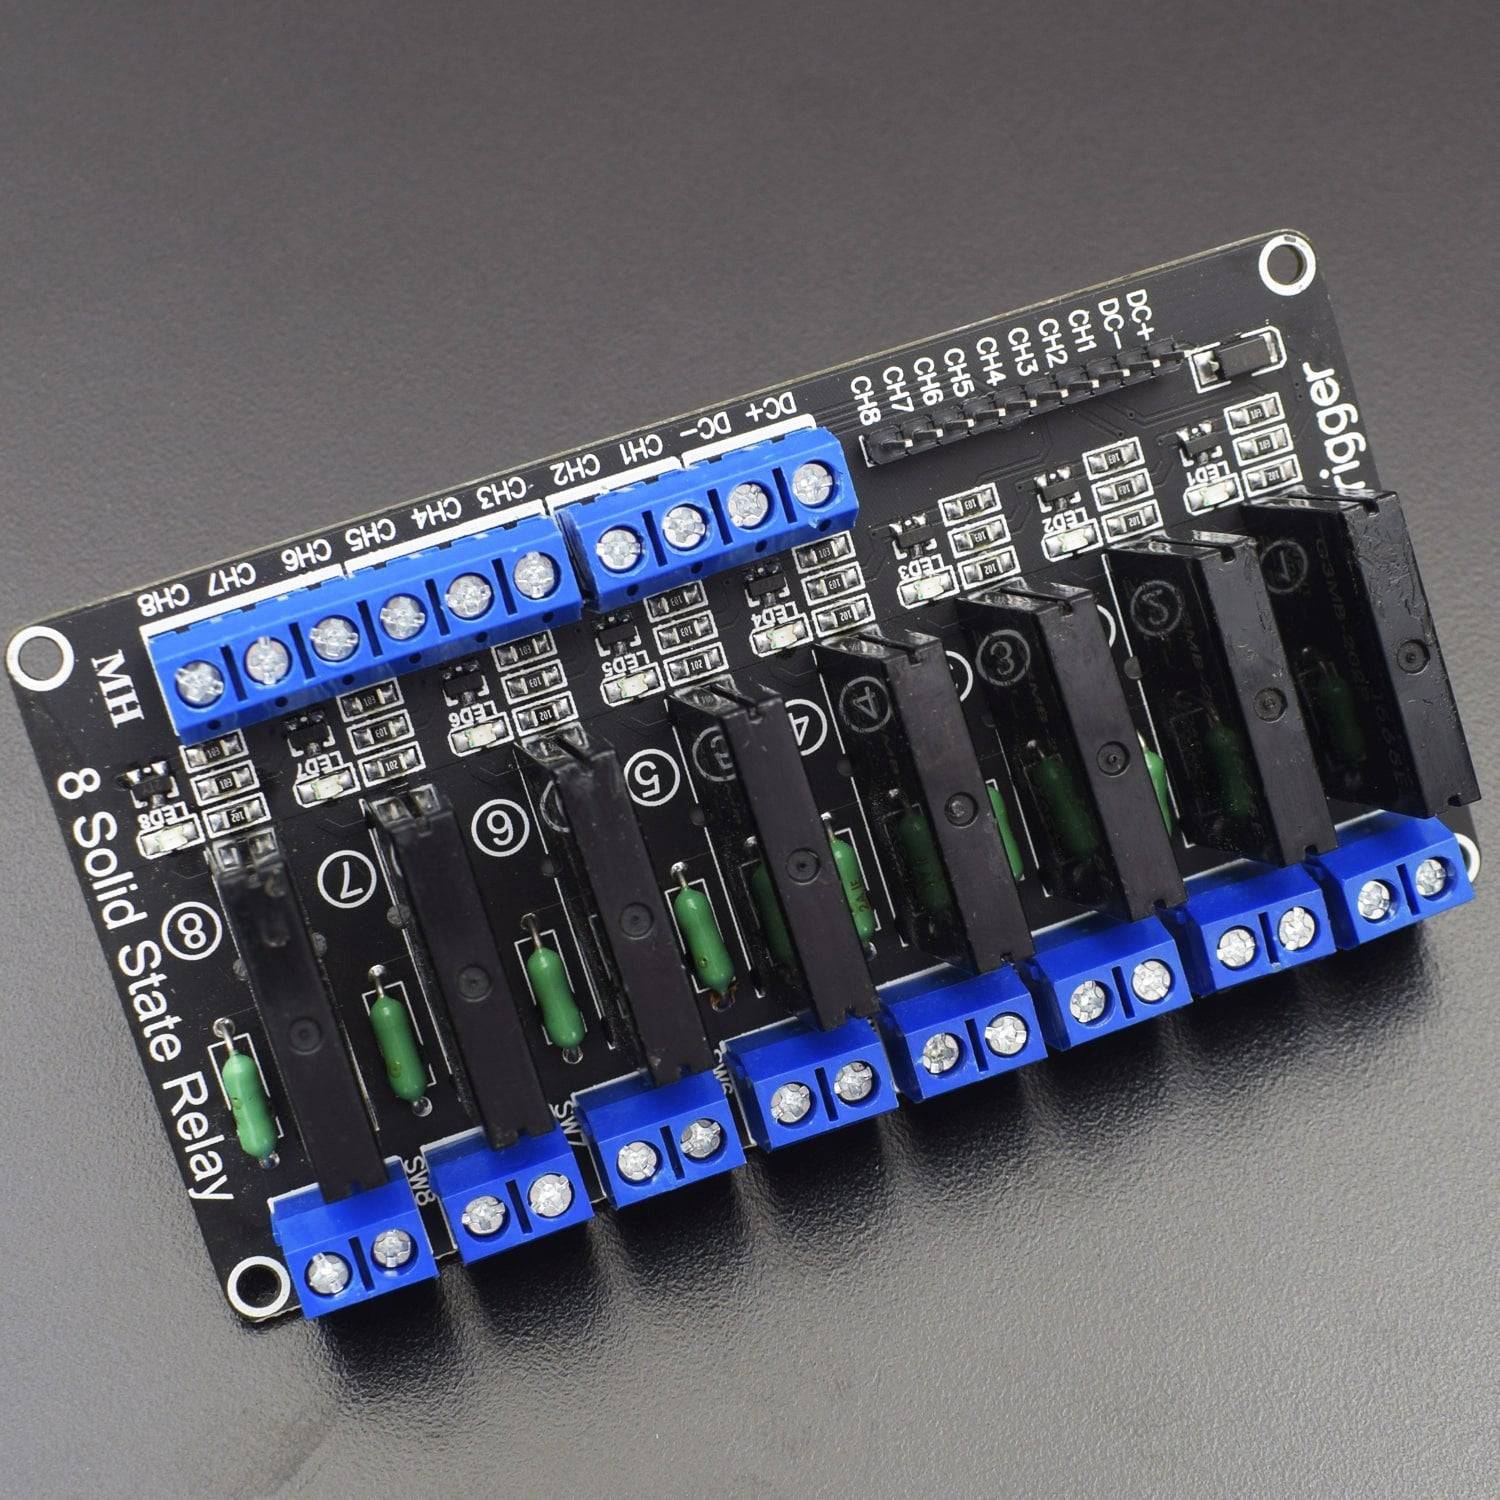 5V 8 Channel Solid State Relay Module 5v Solid State Relay Low Level Trigger Solid State Relay Module - RS2356 - REES52